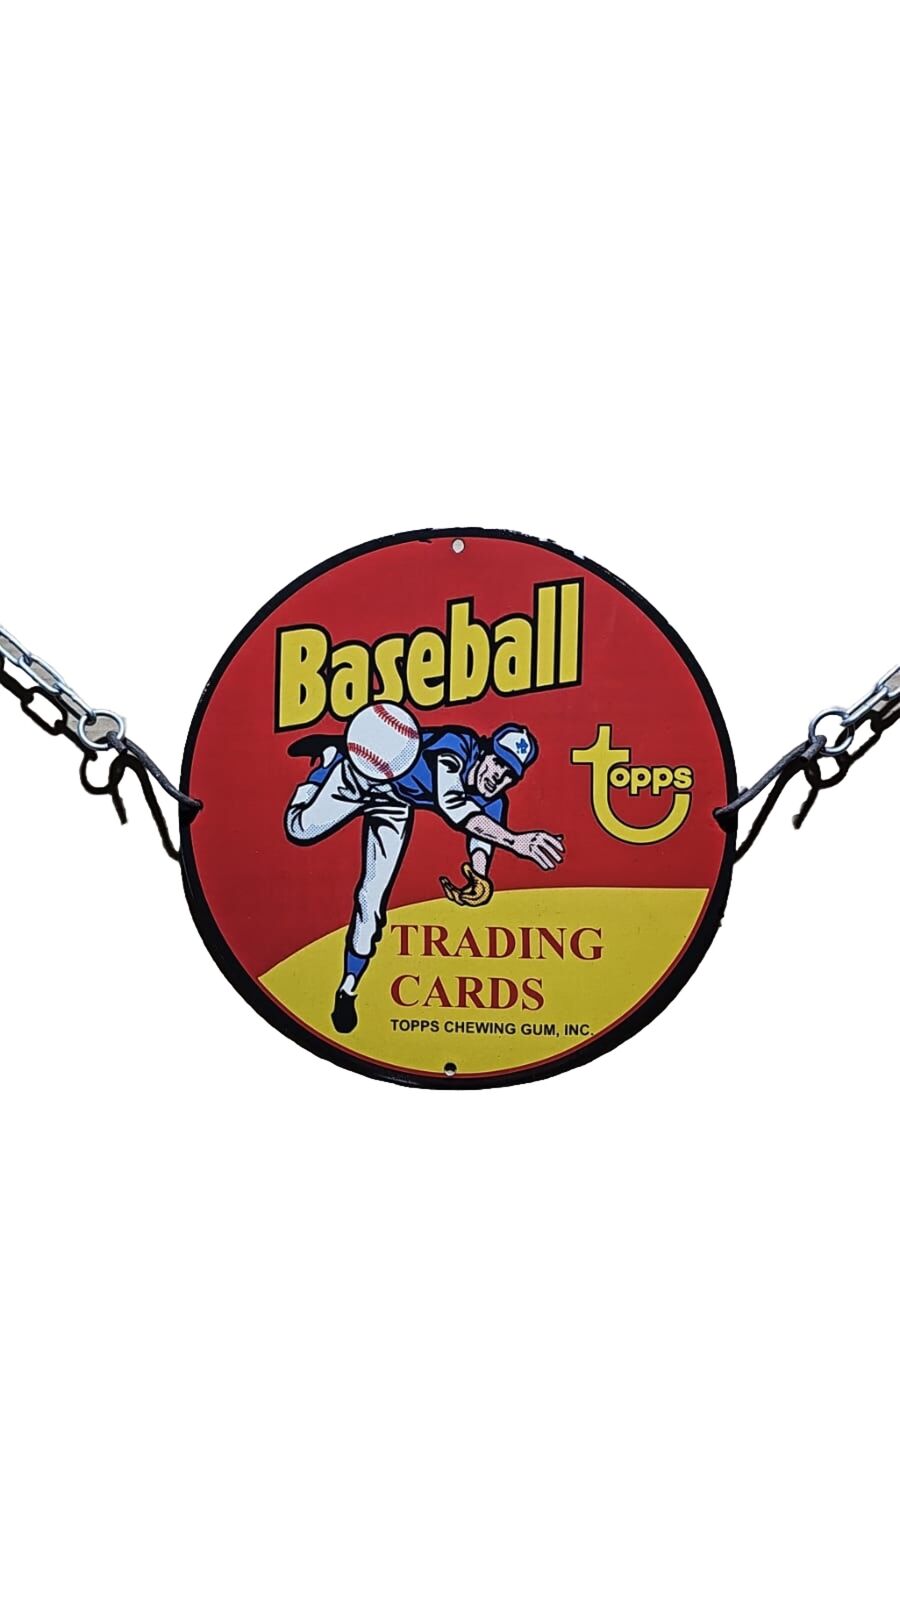 TOPPS CHEWING GUM BASEBALL CARDS PORCELAIN METAL GARAGE MANCAVE GAS AD SIGN